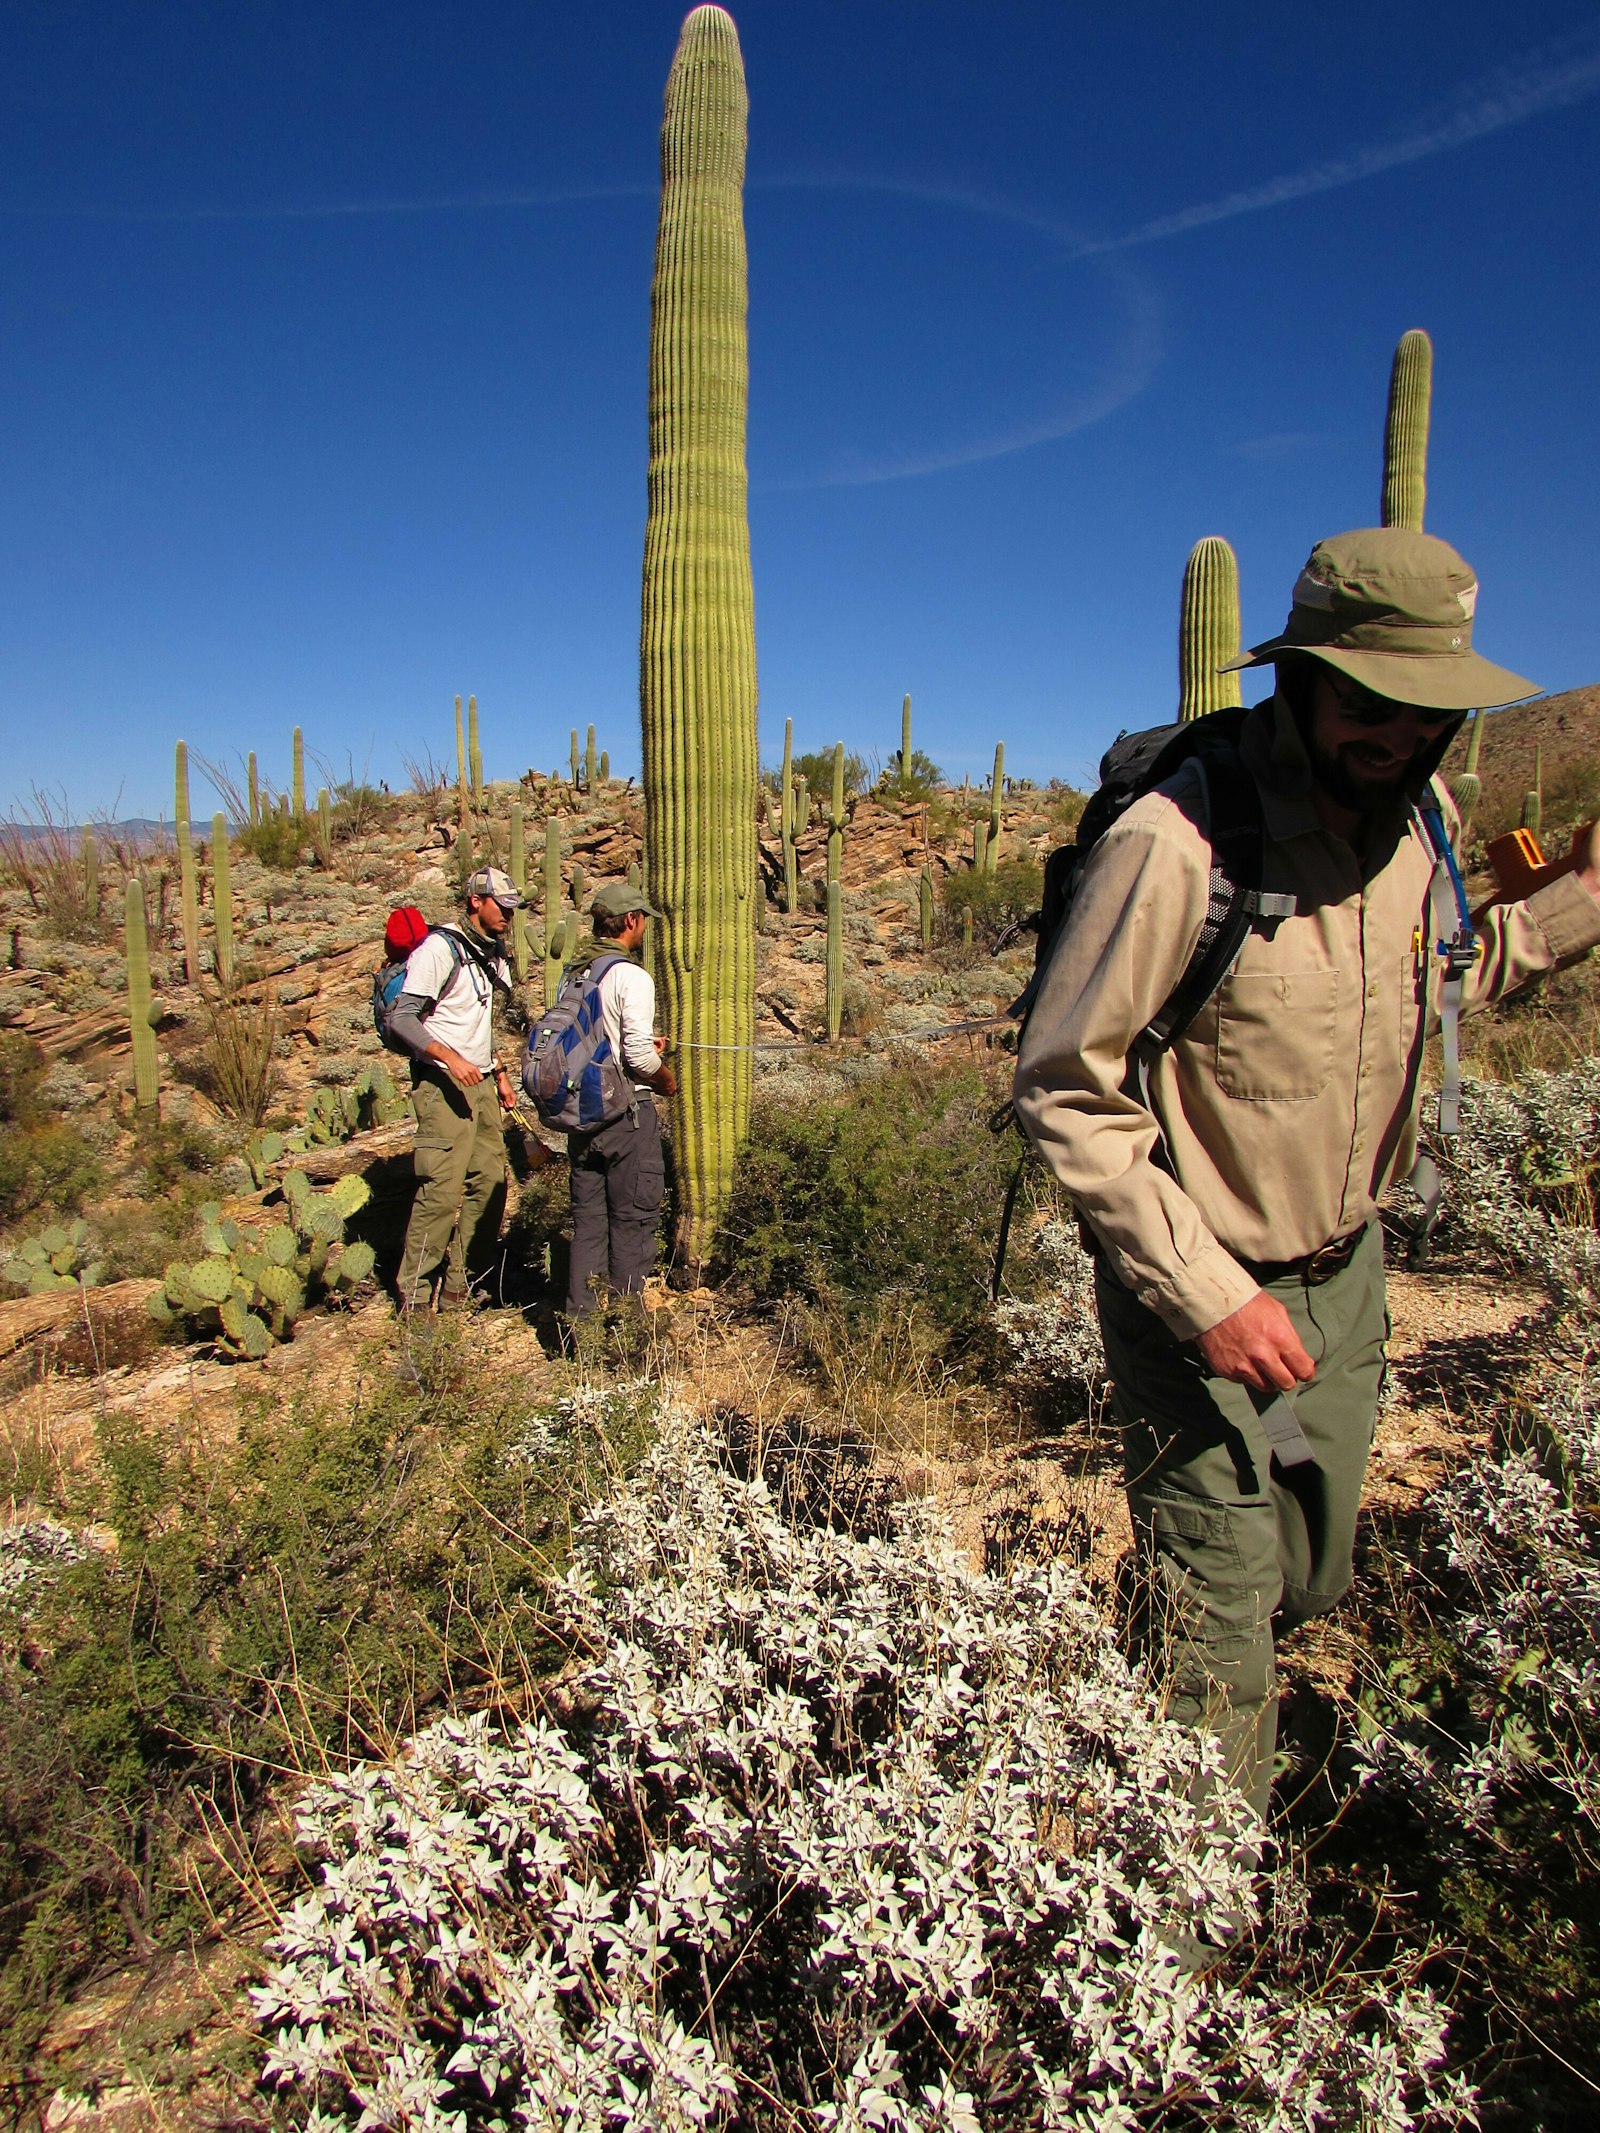 A group of people in a desert surveying cacti